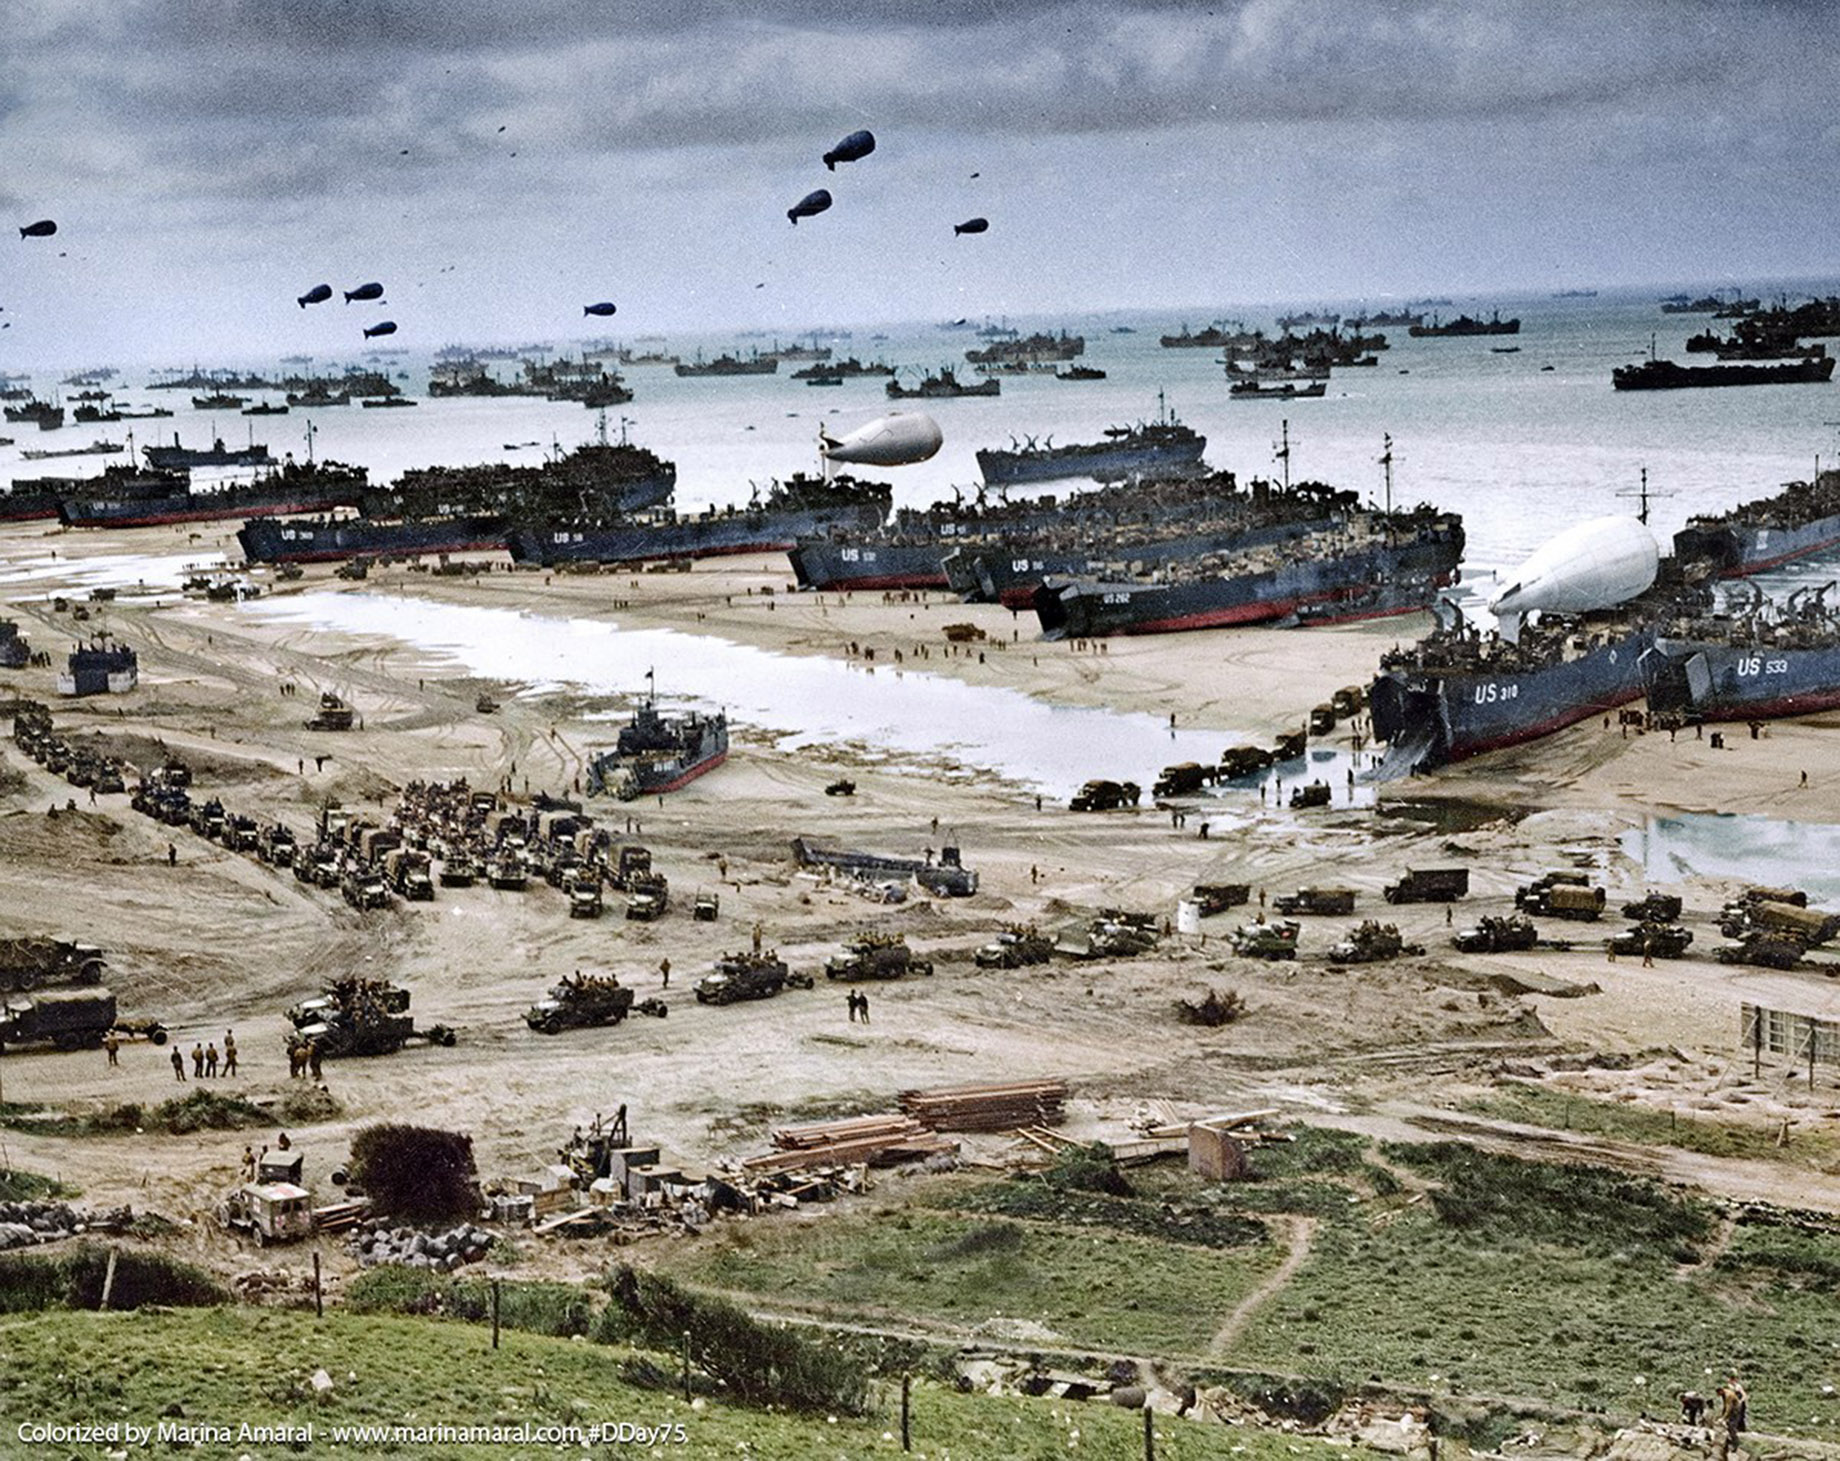 DDay Normandy Beach Operation Overlord Landing Site During World War